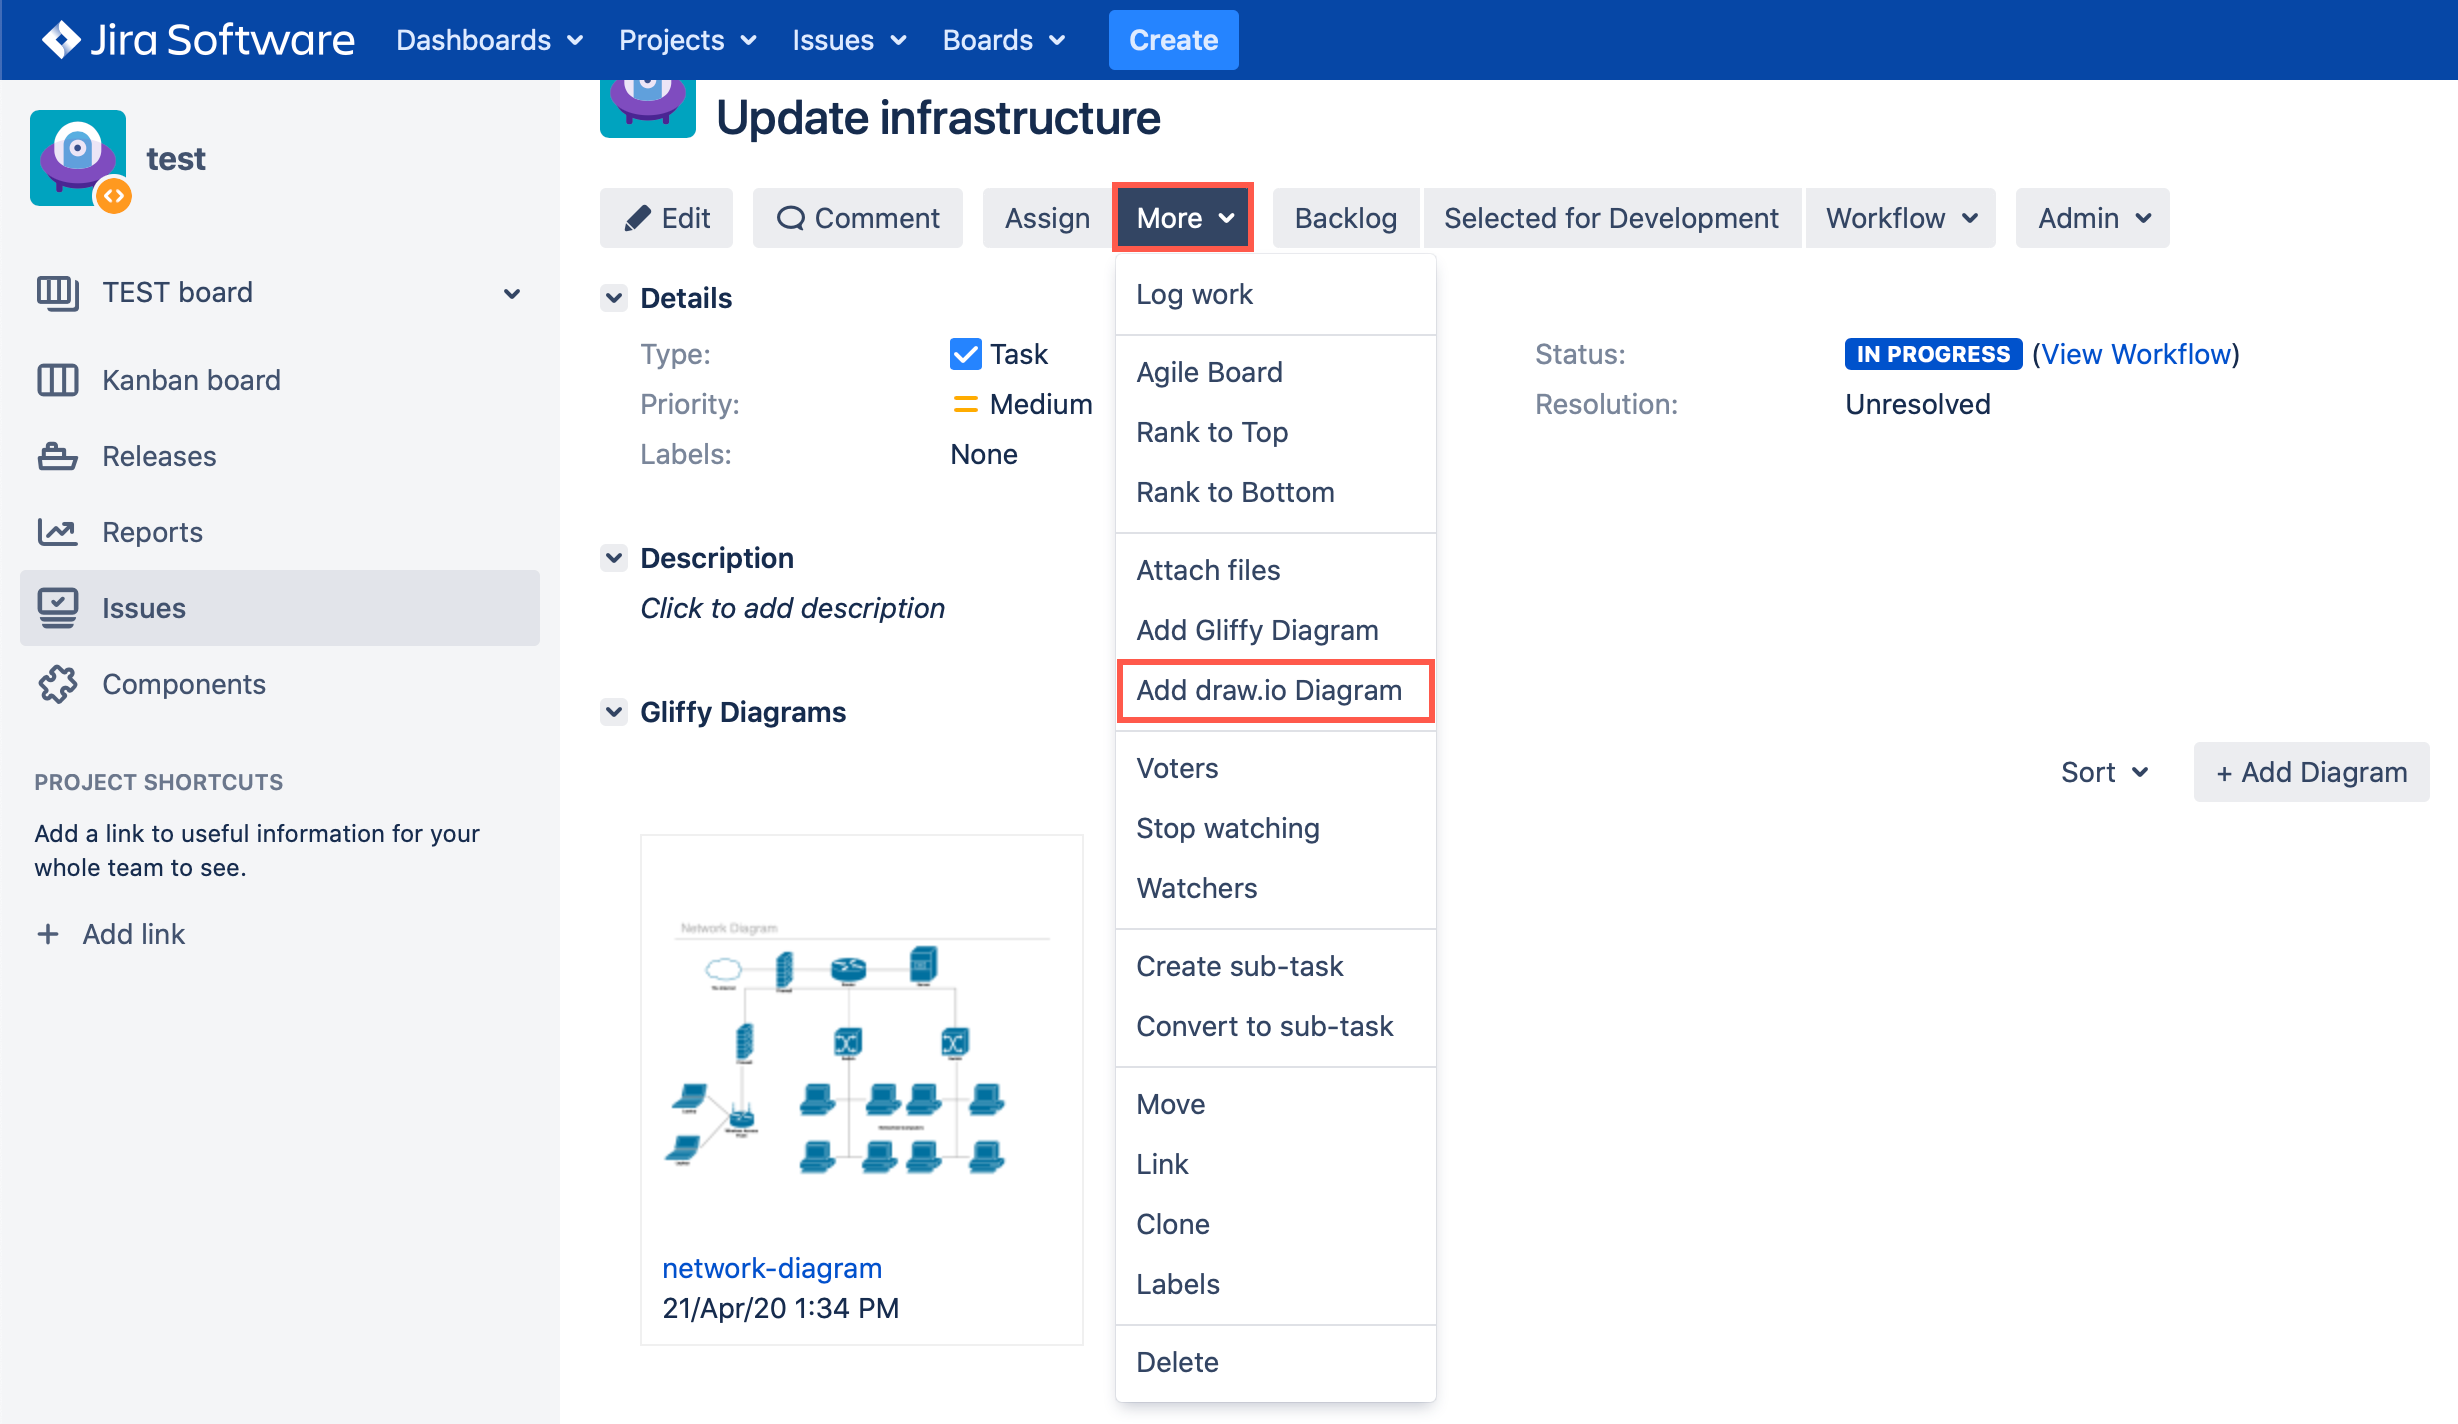 Add a new diagram to an issue in Jira Server